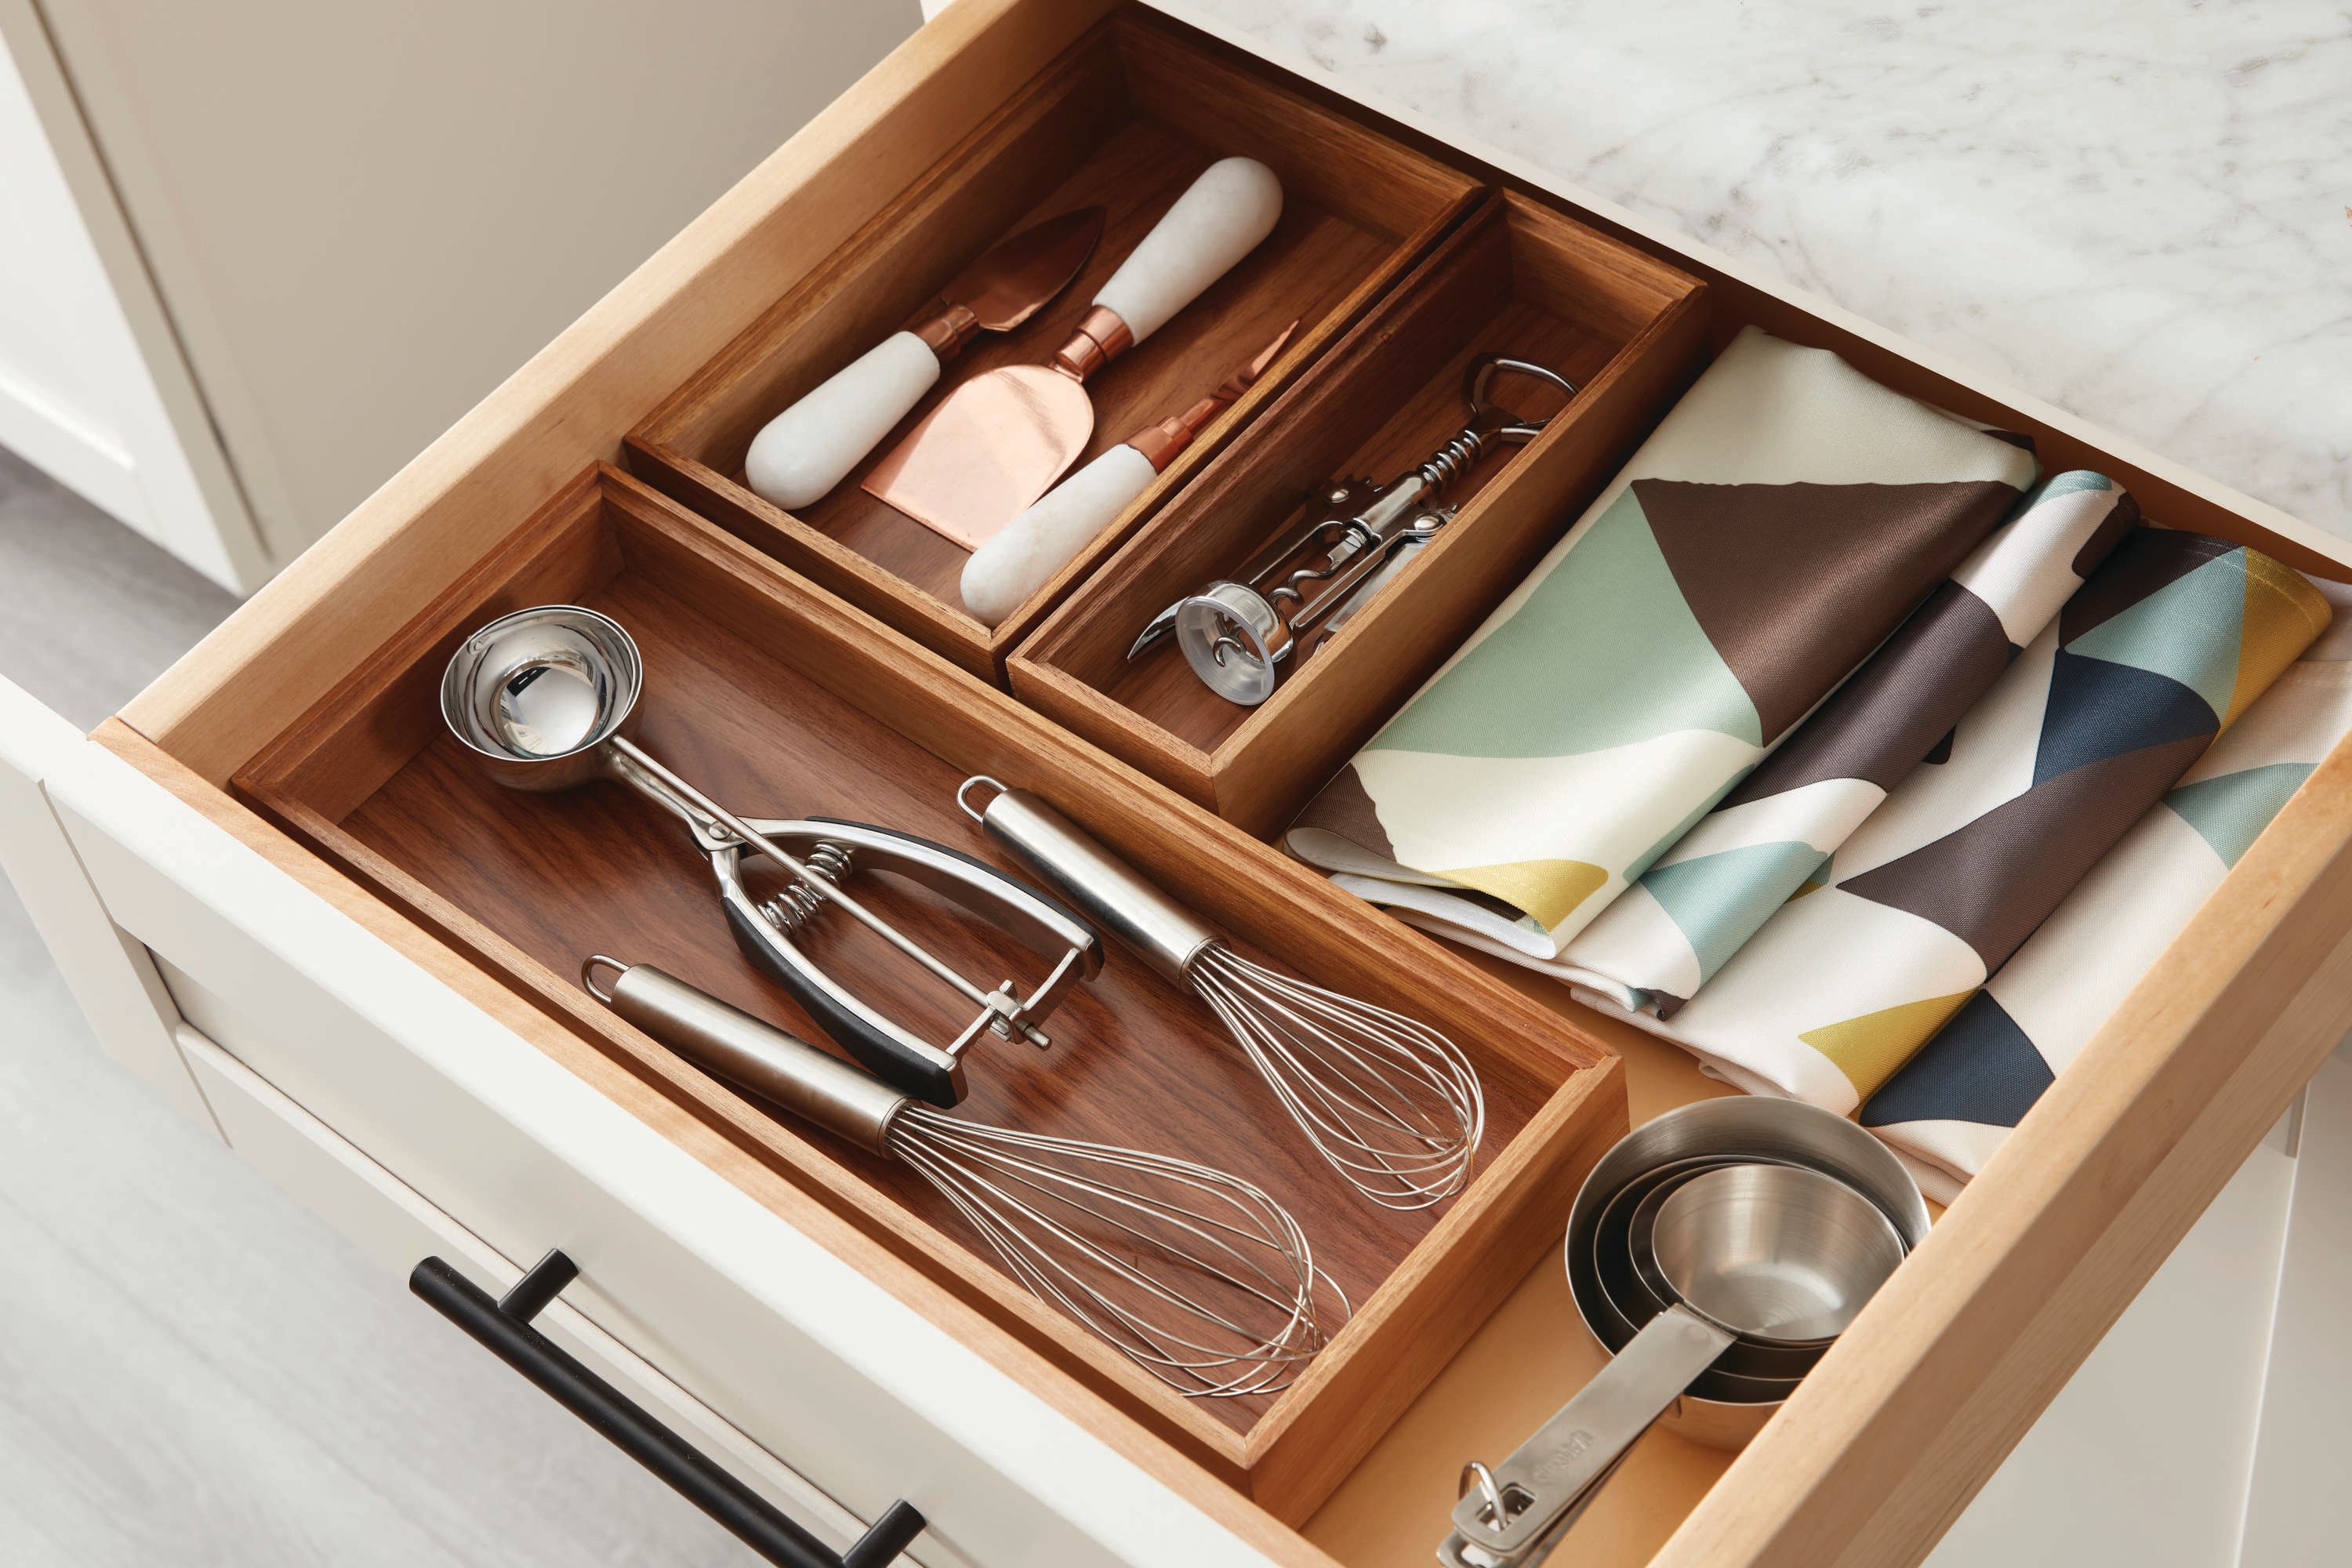 Shop allen + roth Pantry Organization Collection at